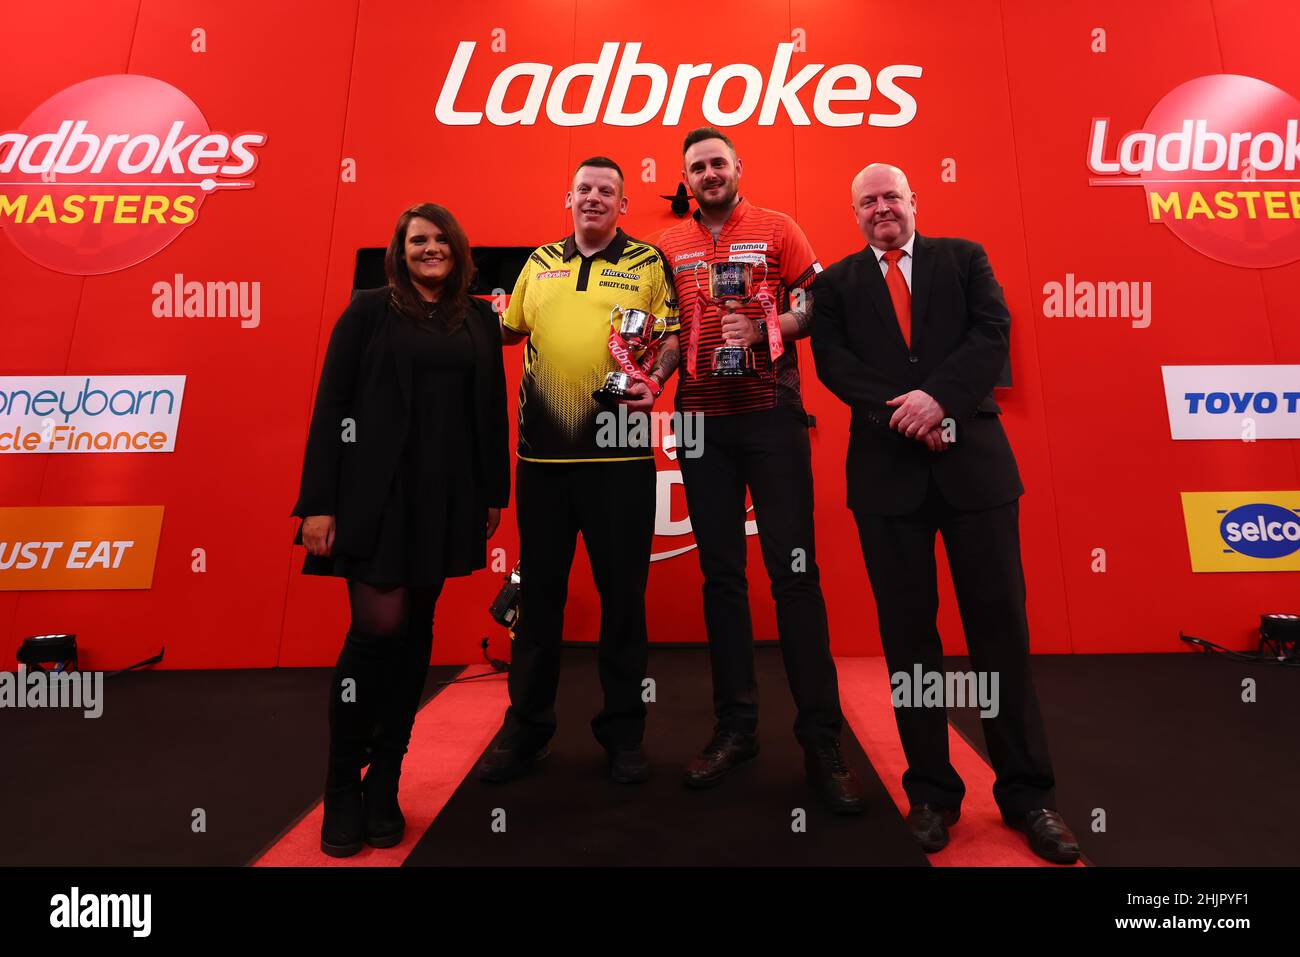 30th 2022; Marshall Arena, Milton Keynes, Bucks, England: Ladbrokes Masters Darts Tournament: Joe Cullen and Dave Chisnall are presented with the Ladbrokes Masters trophy and runners up trophy by sponsors